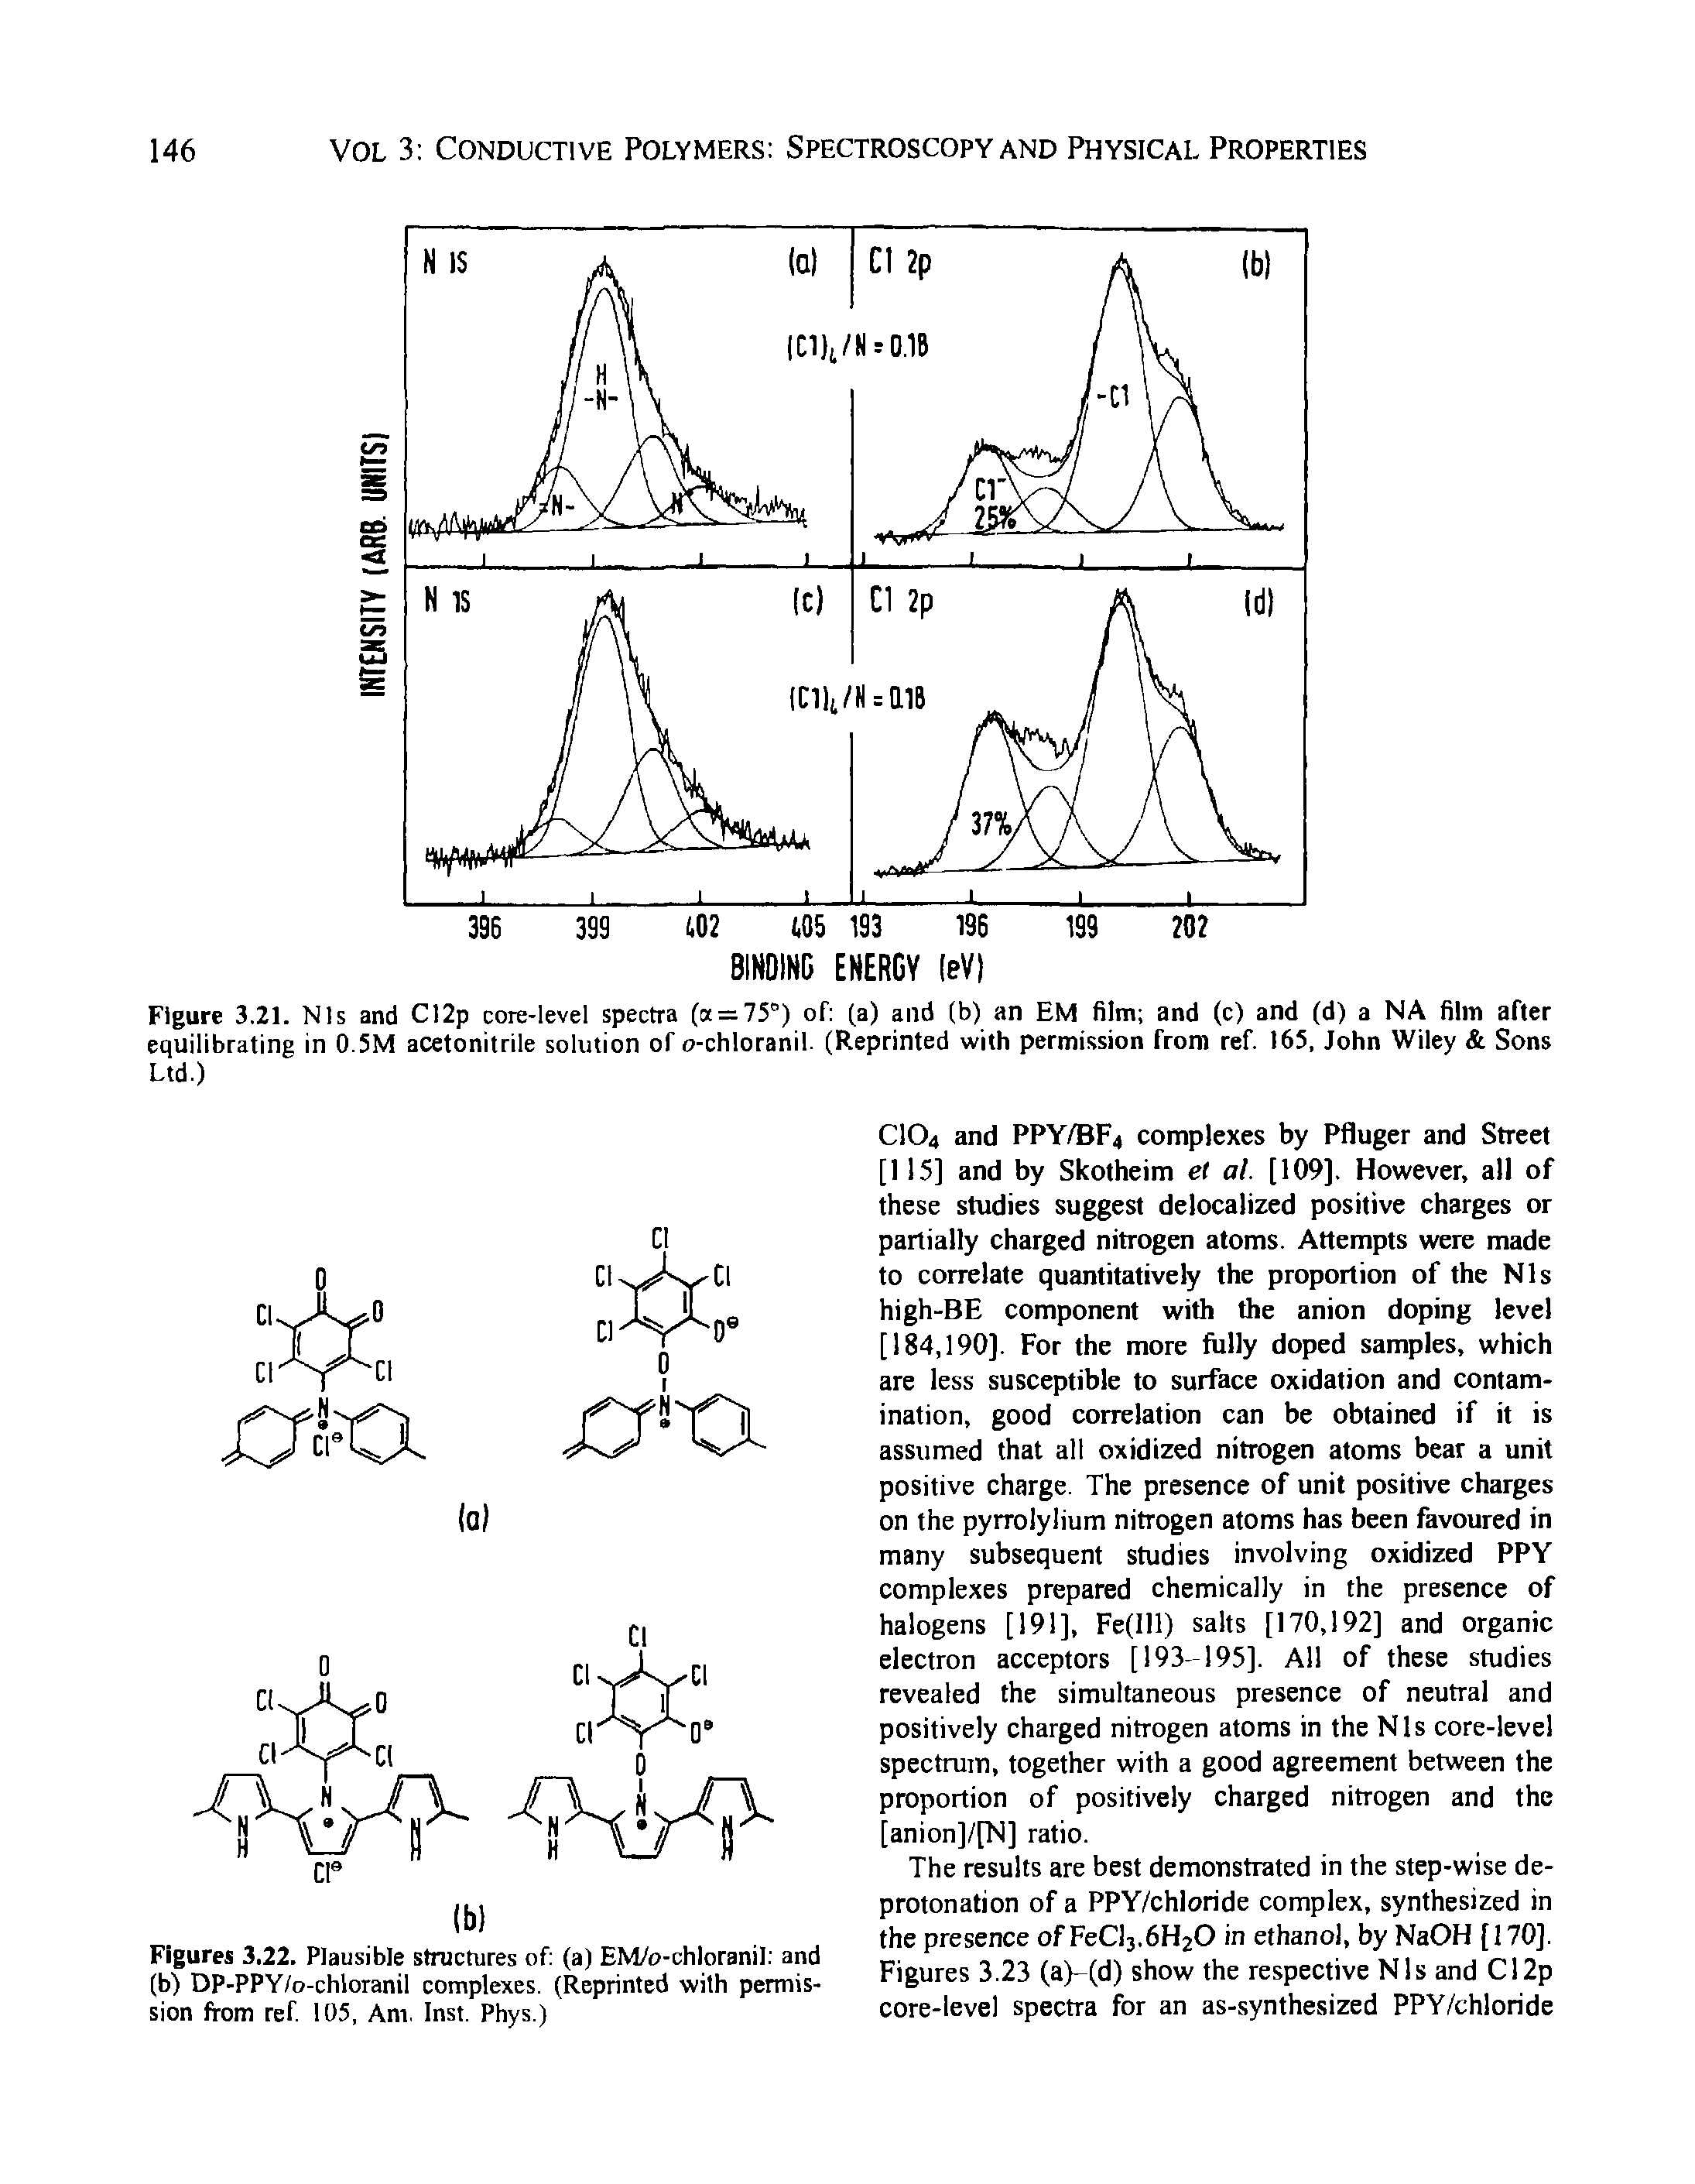 Figures 3.22. Plausible structures of (a) EM/o-chloranil and (b) DP-PPY/o-chloranil complexes. (Reprinted with permission from ref 105, Am, Inst. Phys.)...